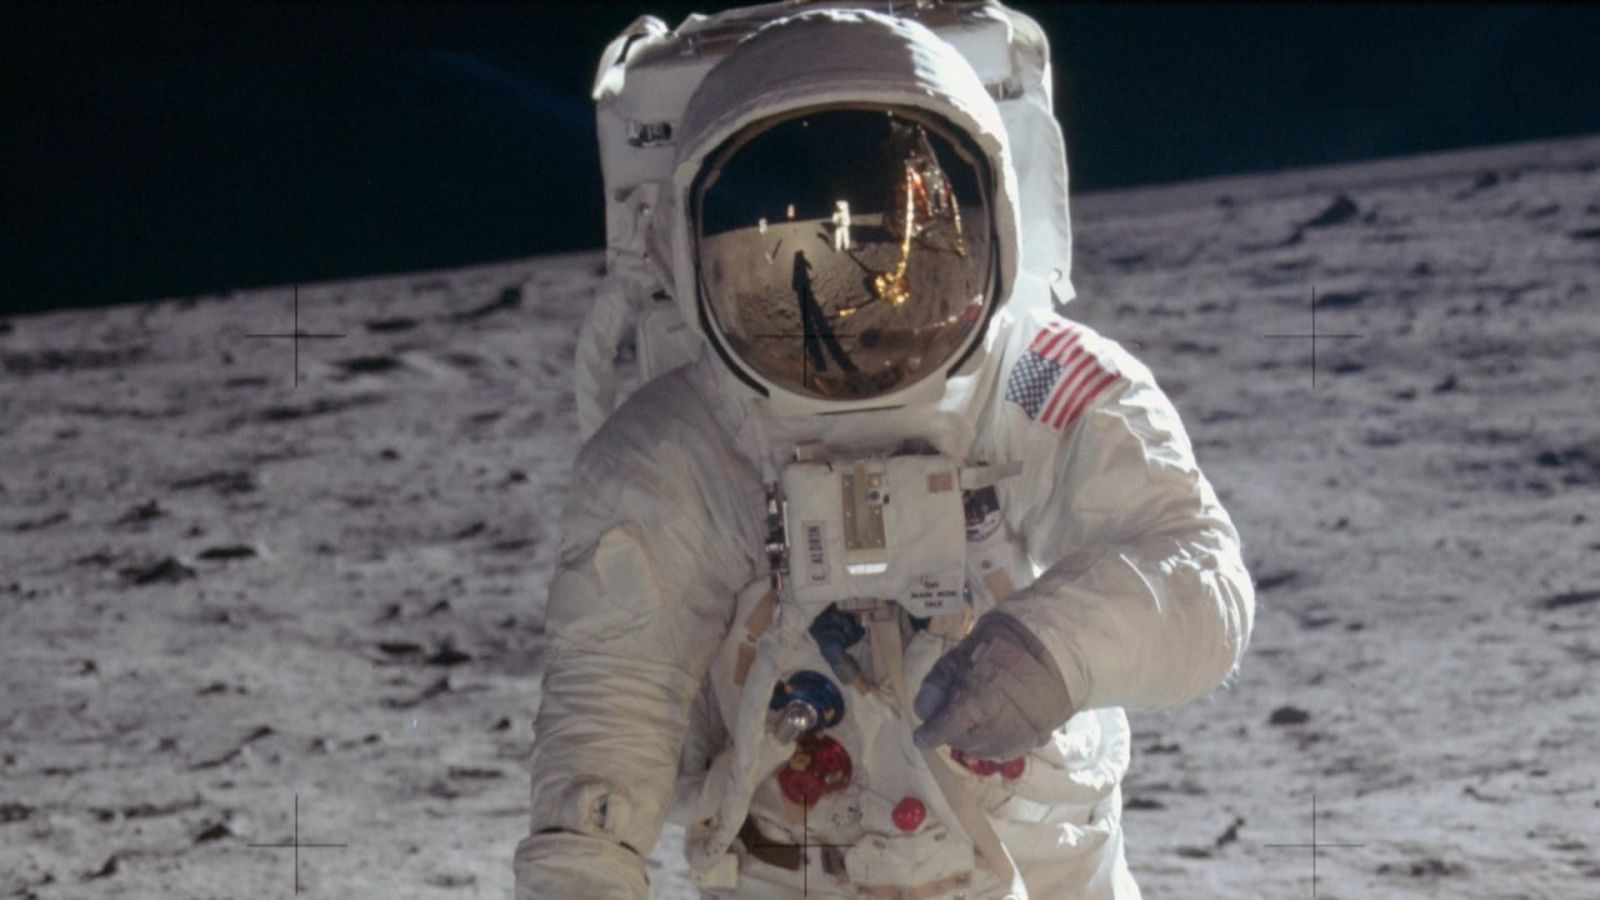 Watch Movie Apollo: Missions to the Moon (2019) Free Online